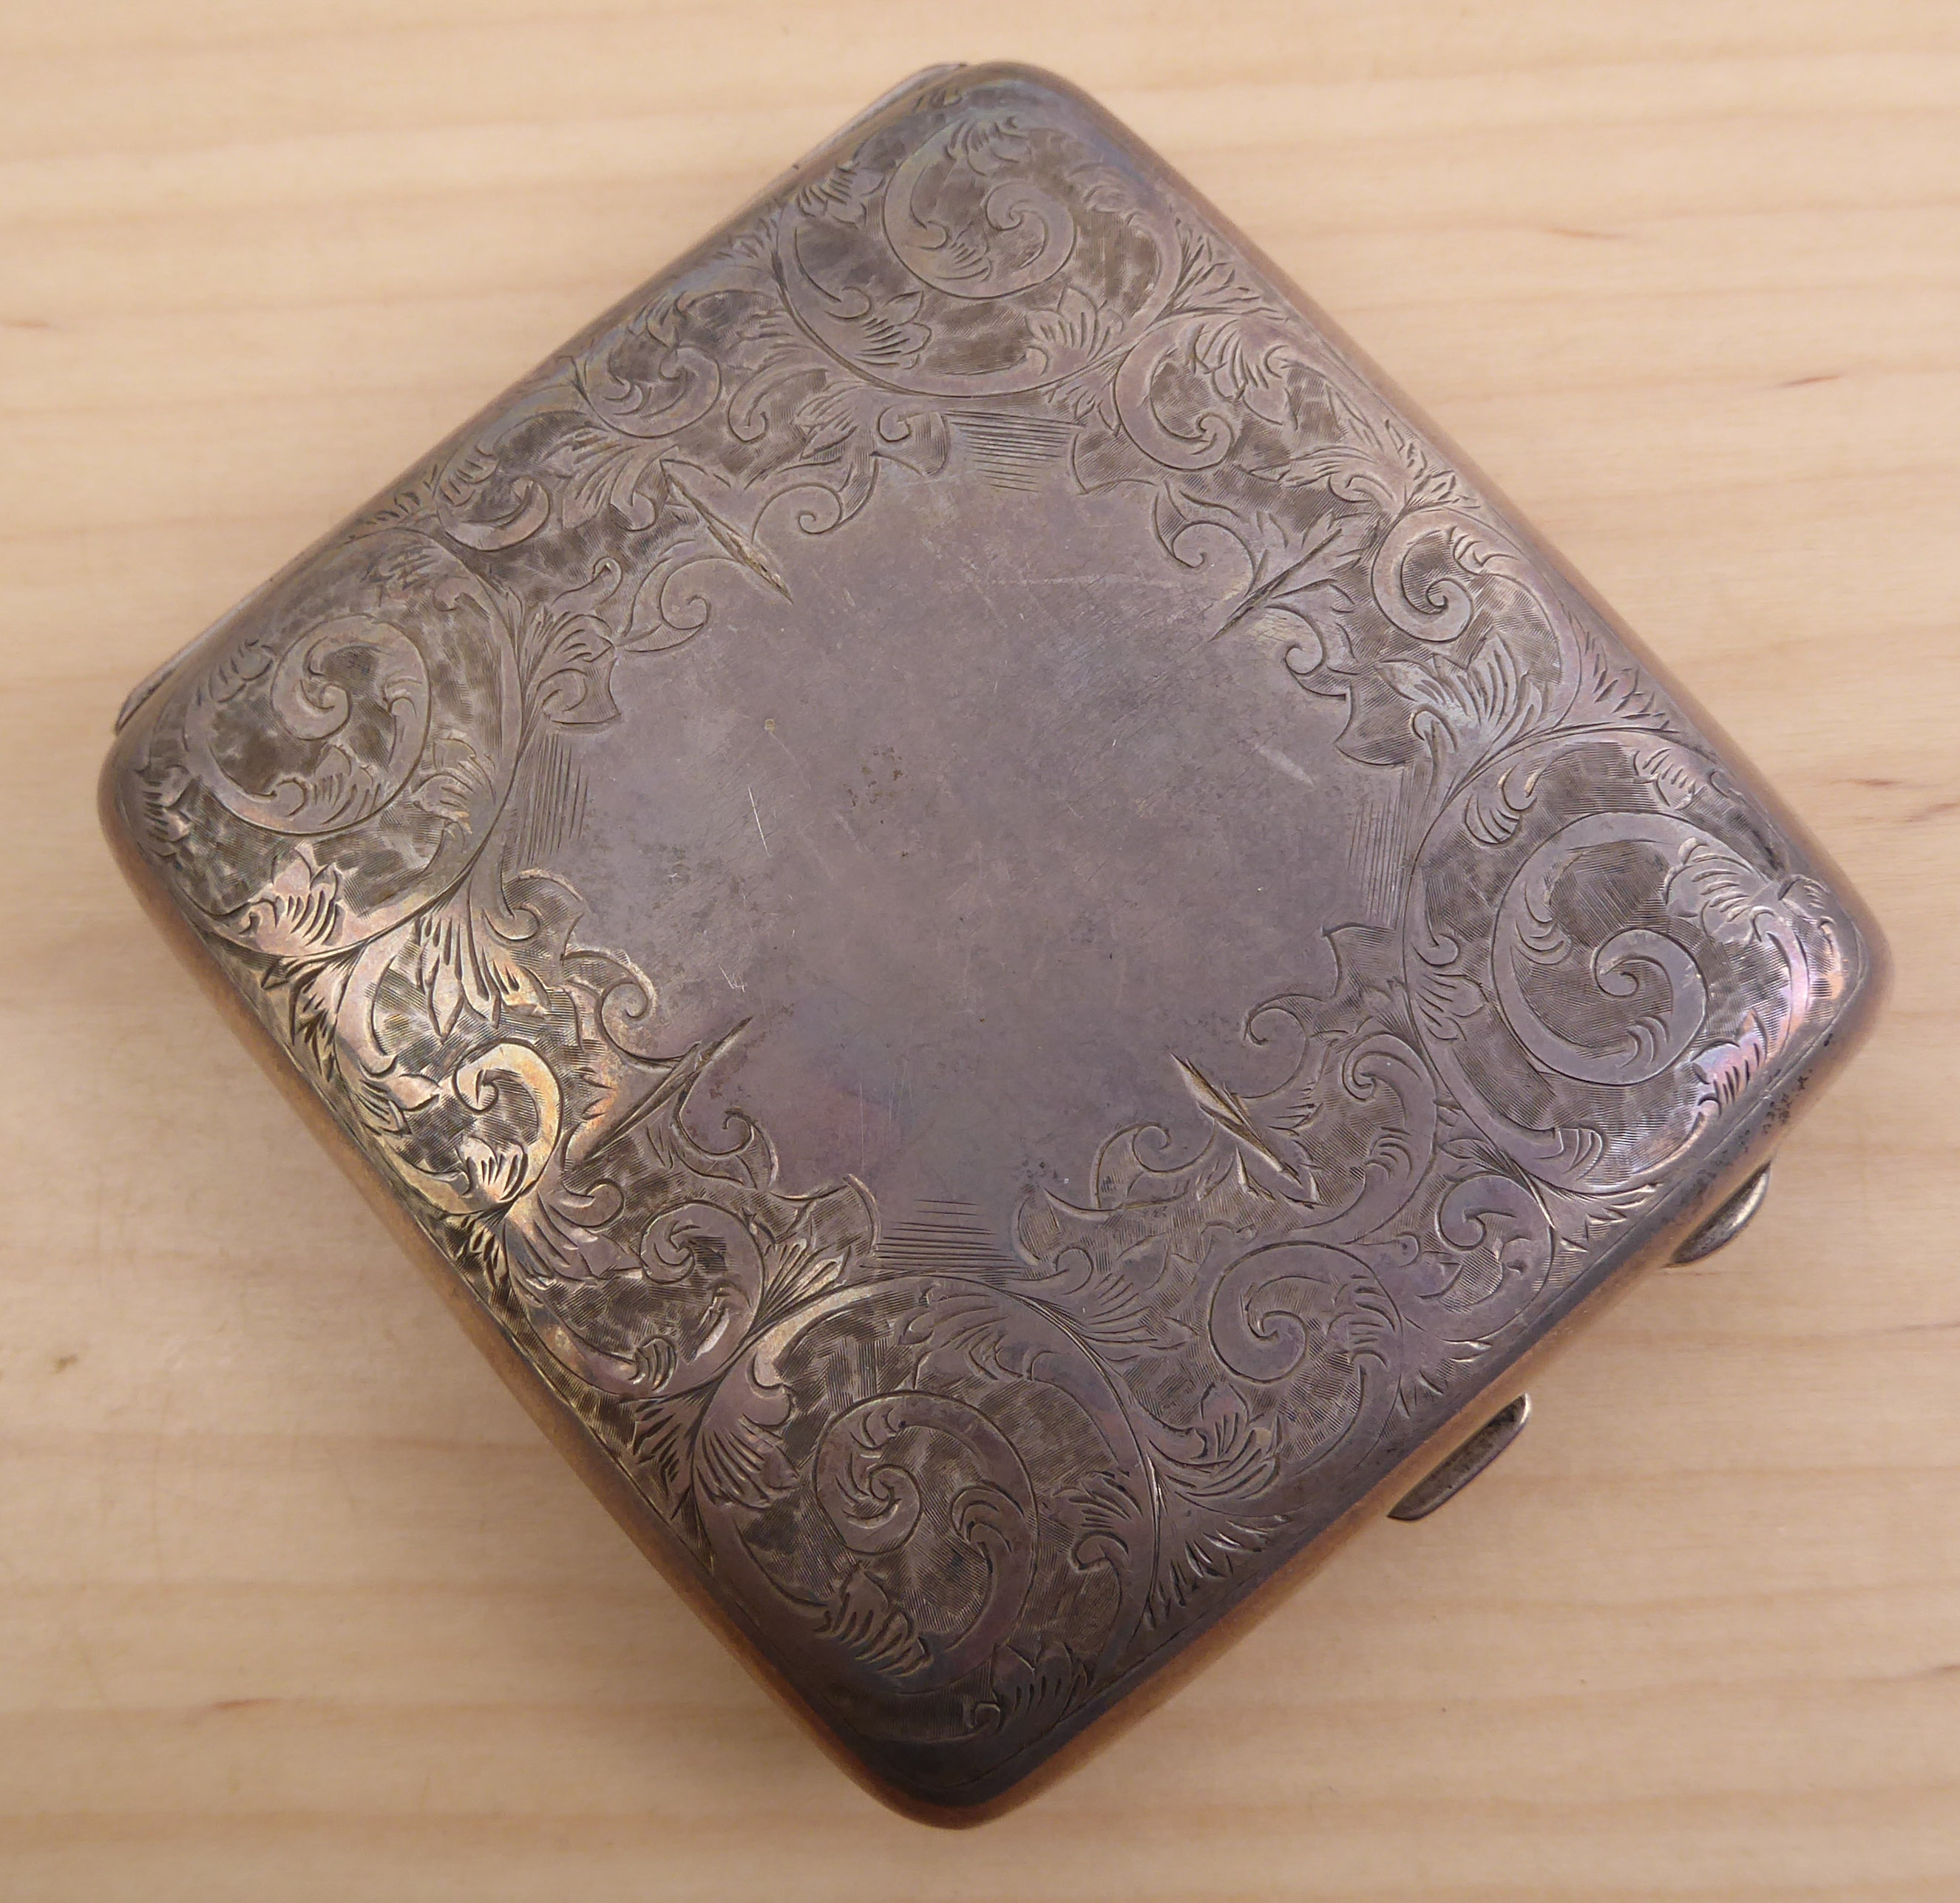 A George VI silver double cigarette case - Charles Edward Turner, Birm. 1941, rectangular with - Image 4 of 8